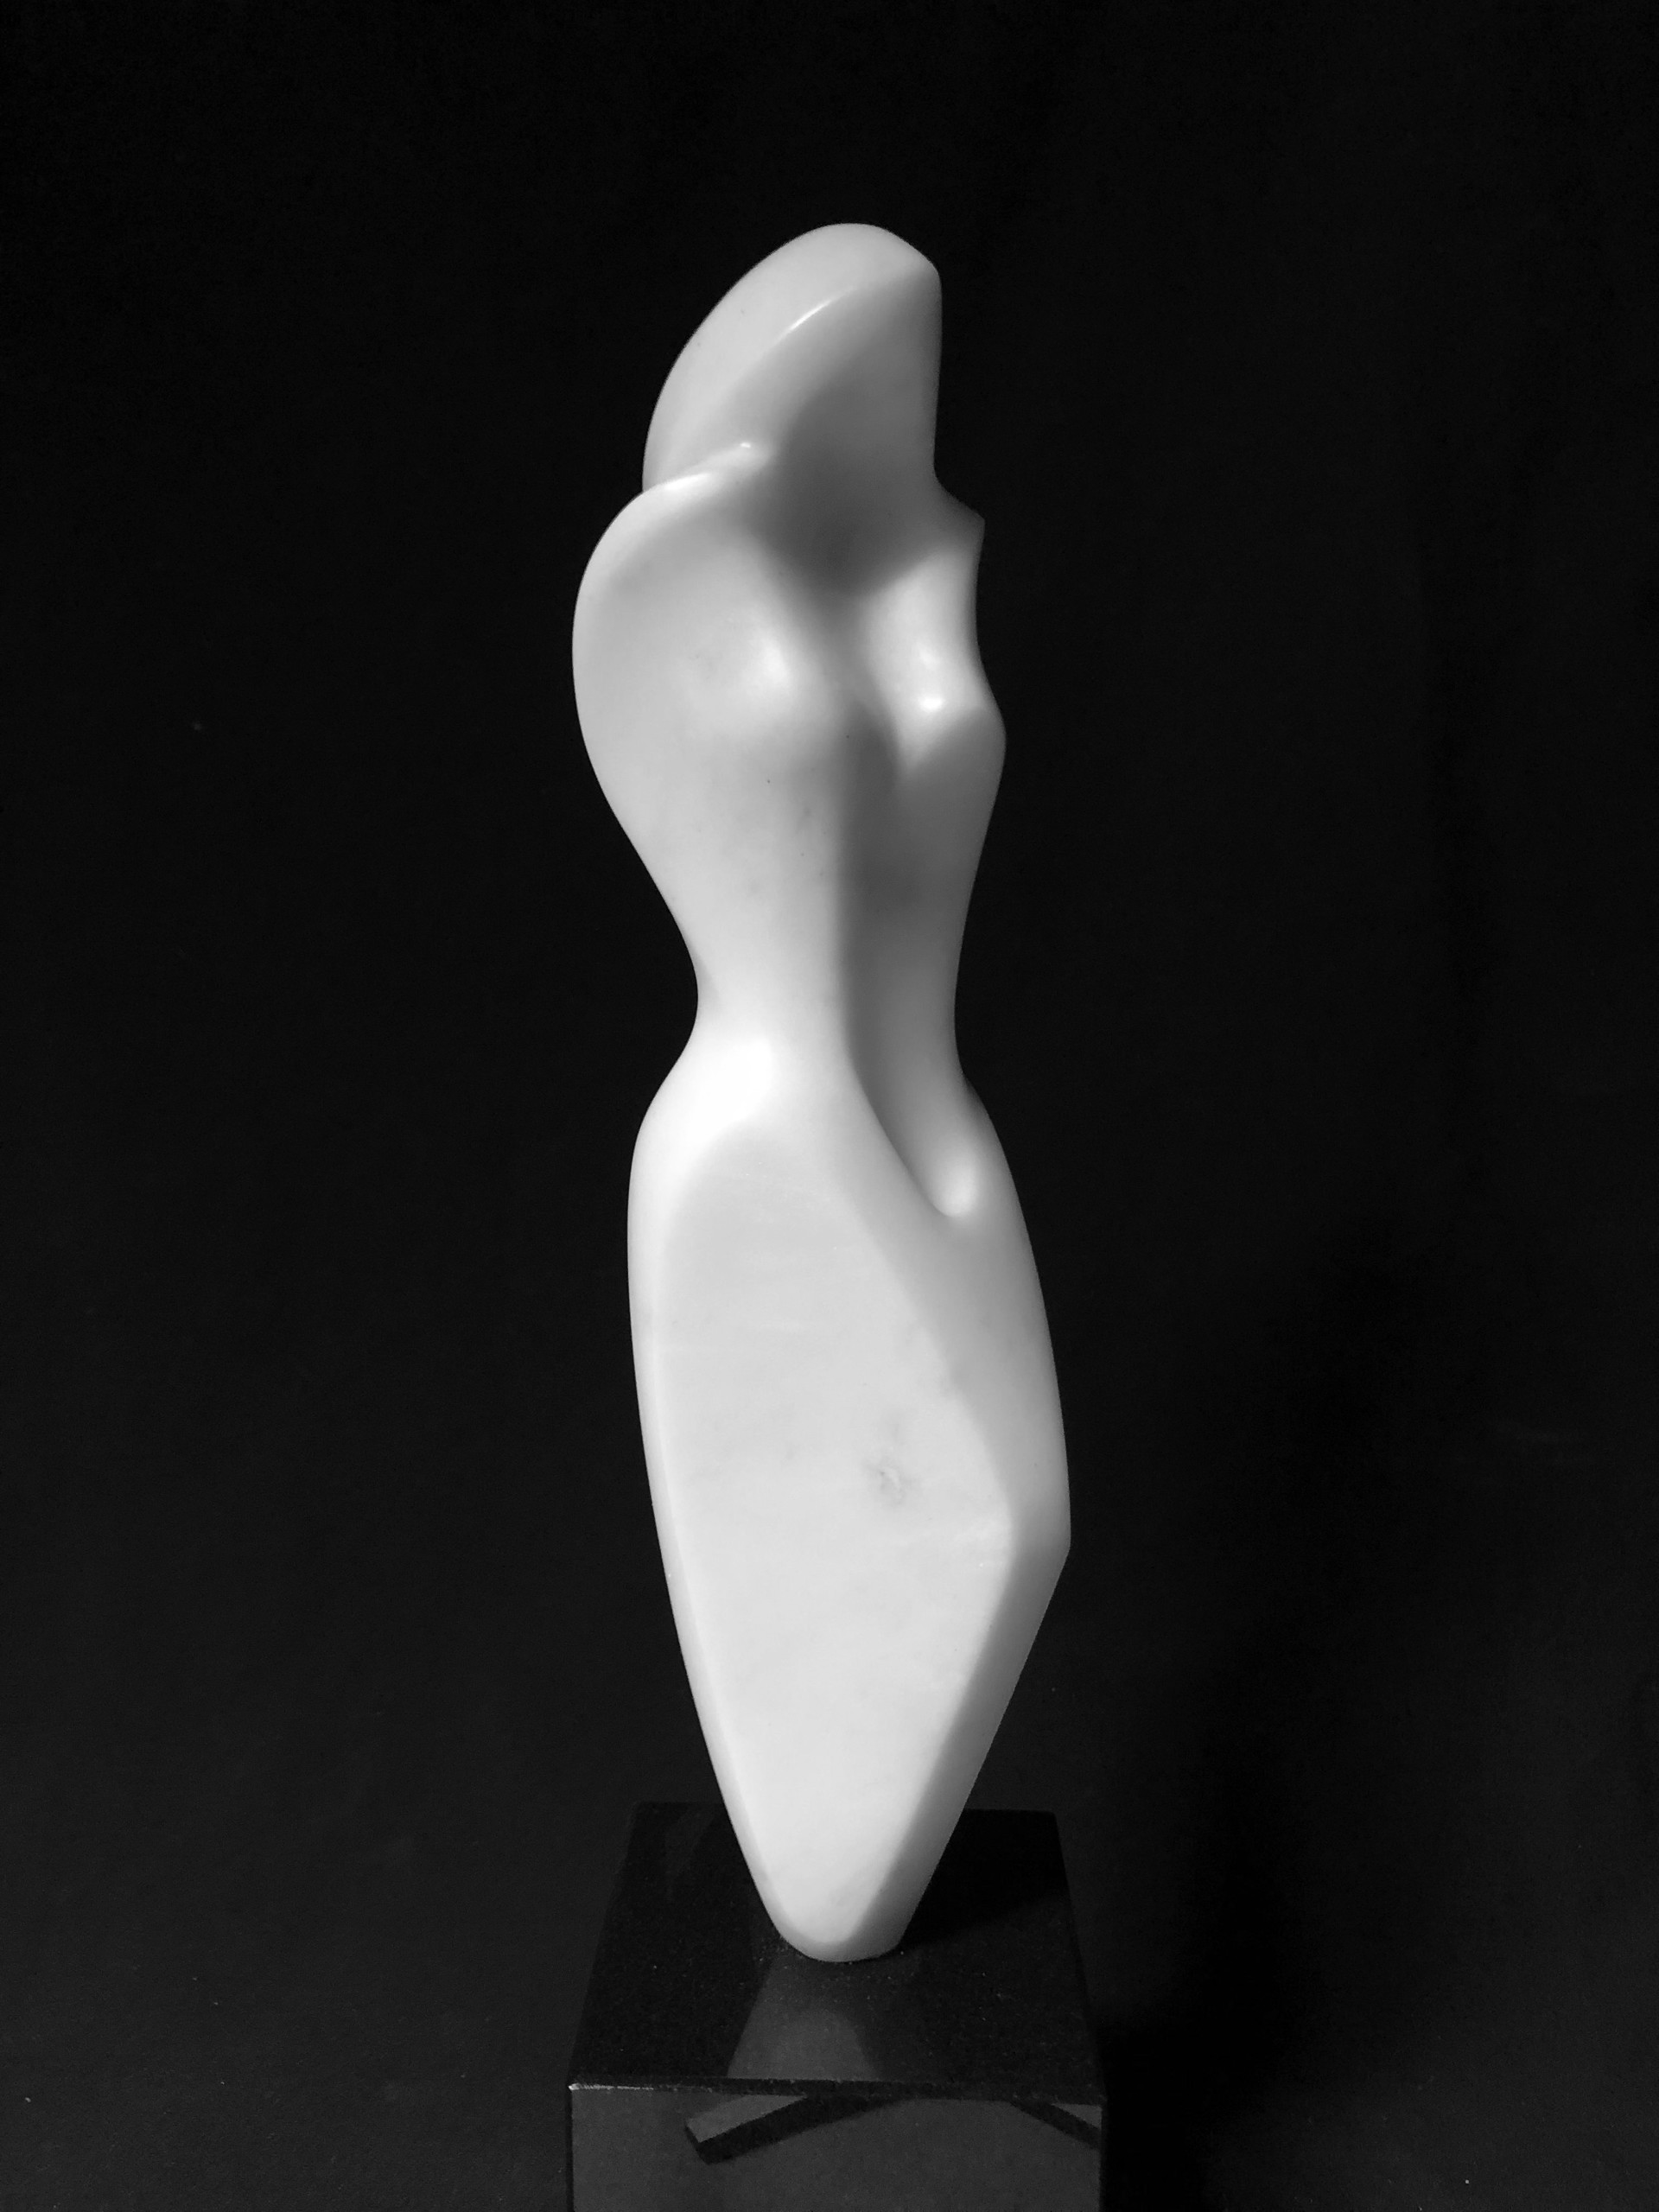 25" version of Venus on 3" H x 8" D base. Base included in height. by Steven Lustig